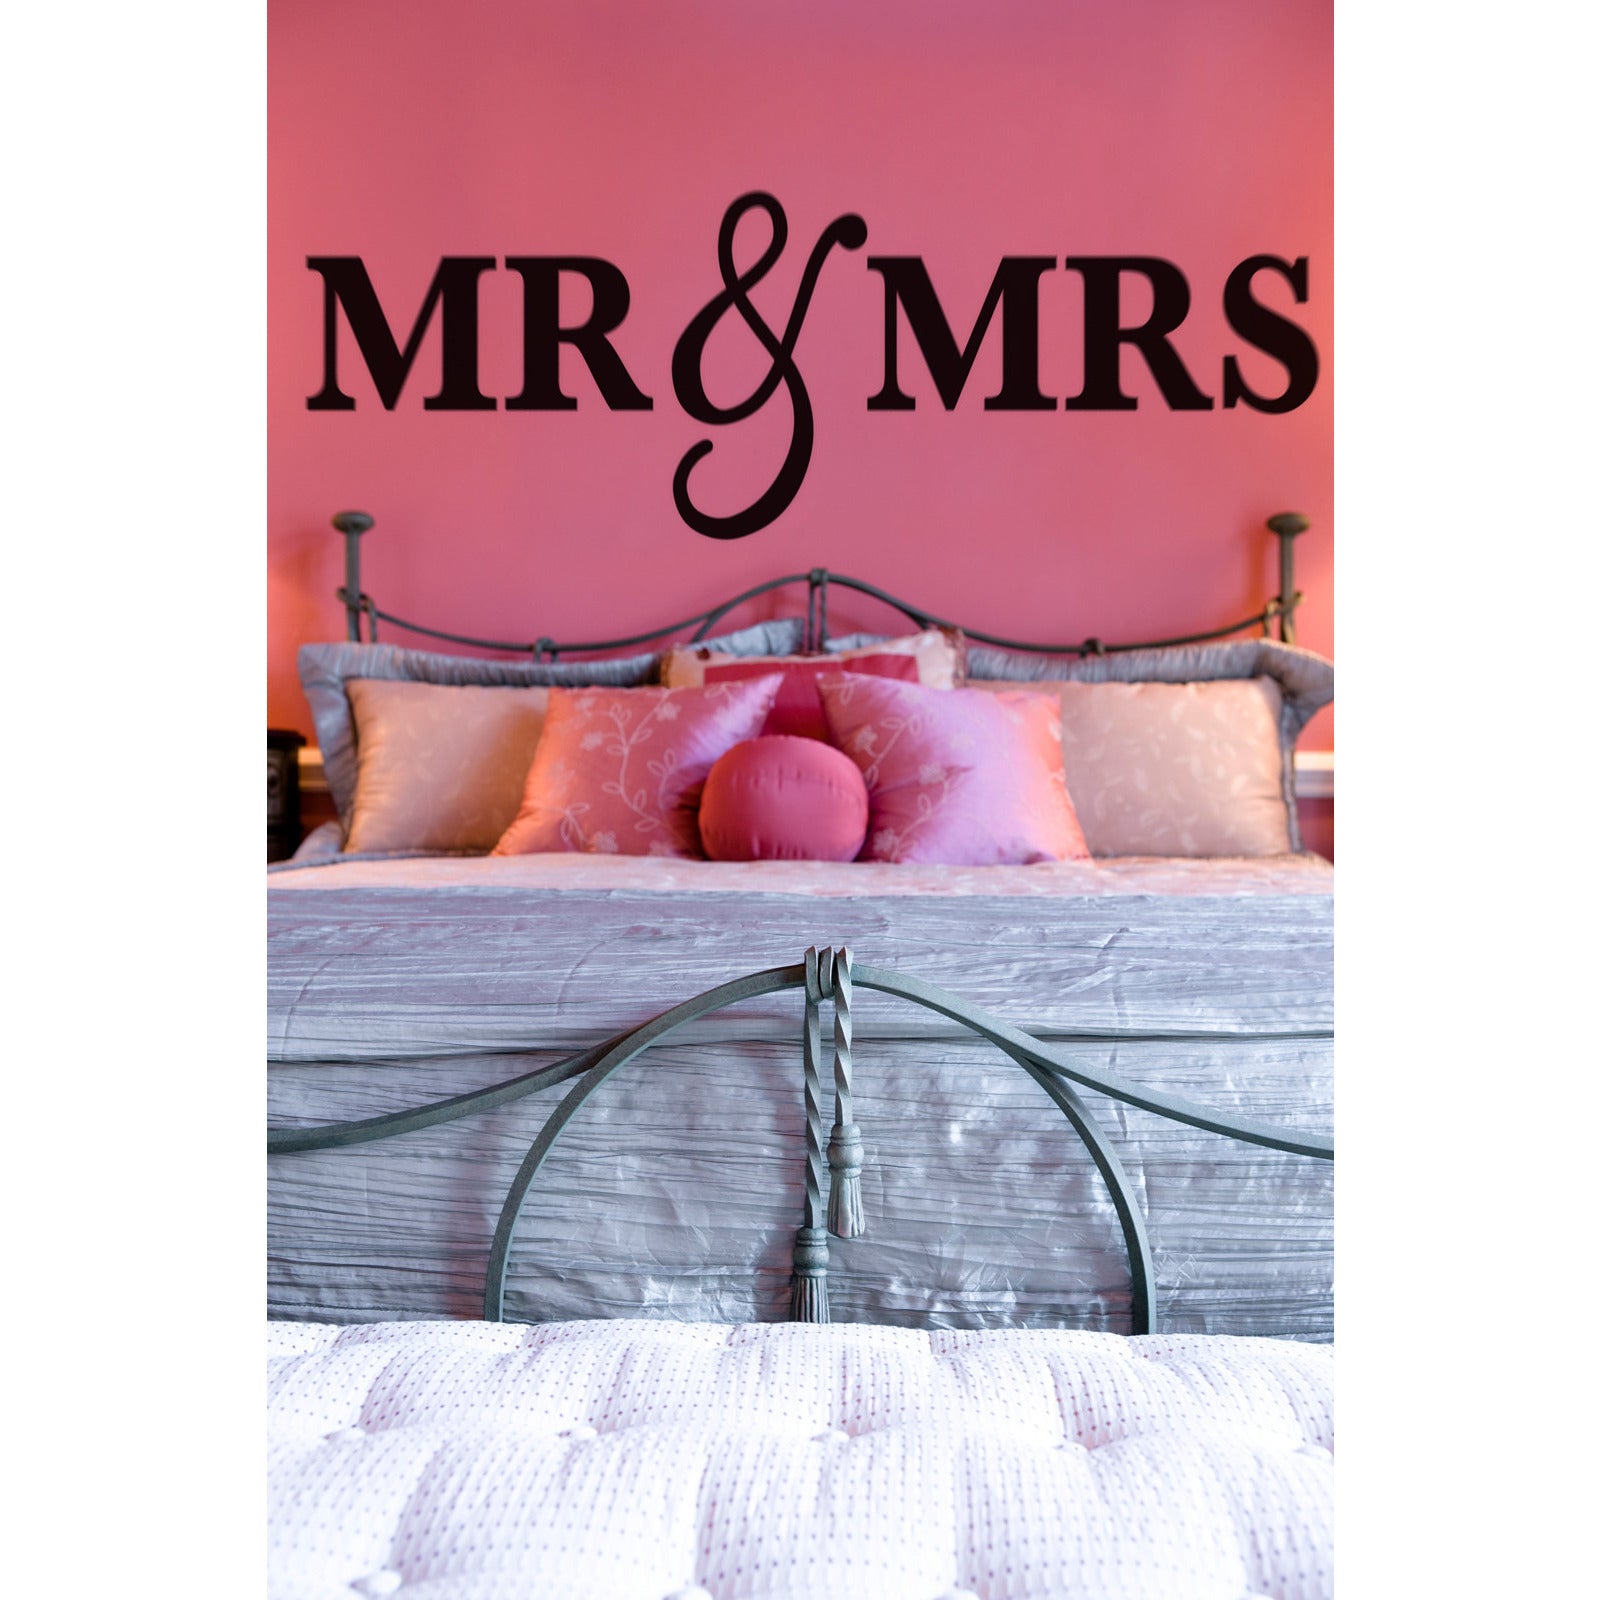 Mr & Mrs Wall Signs QUEEN SIZE - Wedding Decor Gifts